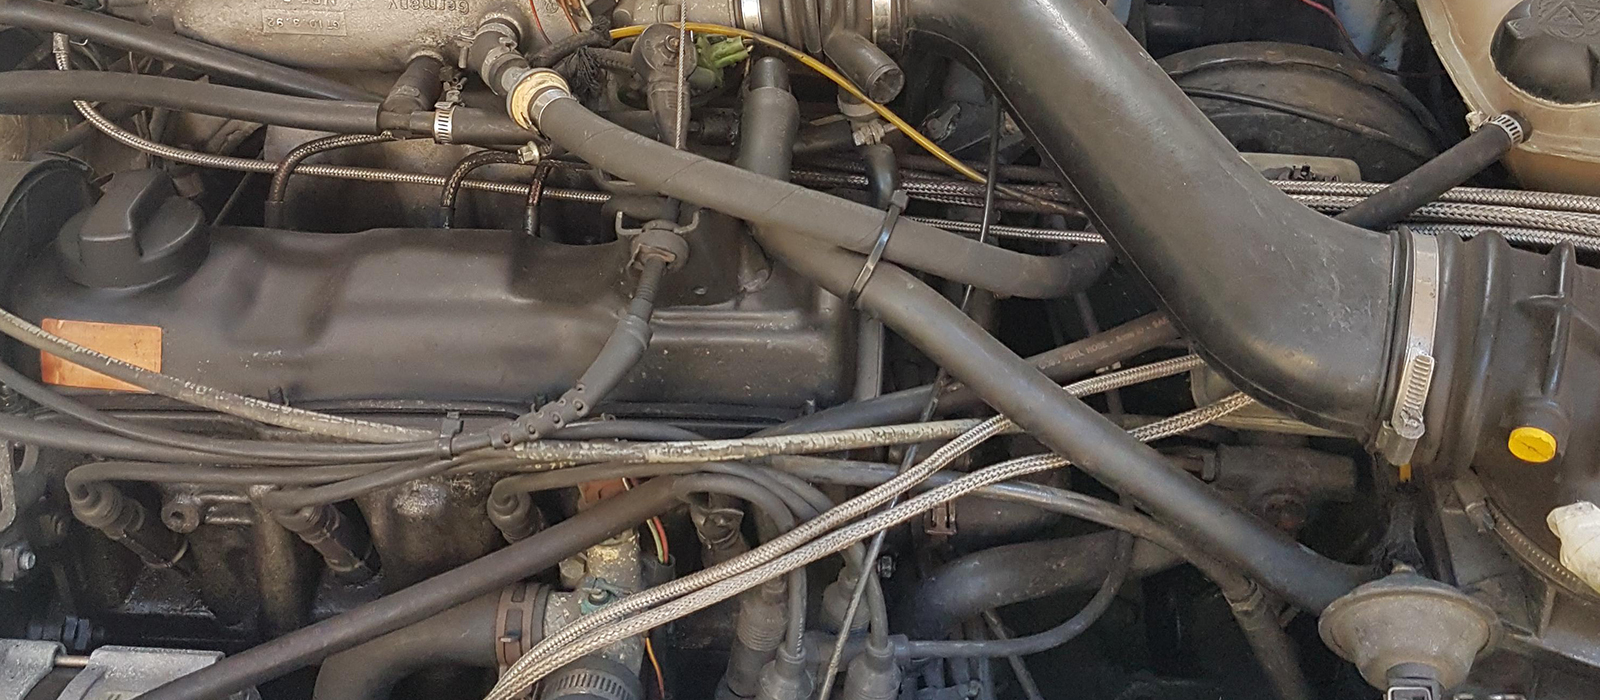 Replace rocker cover gasket